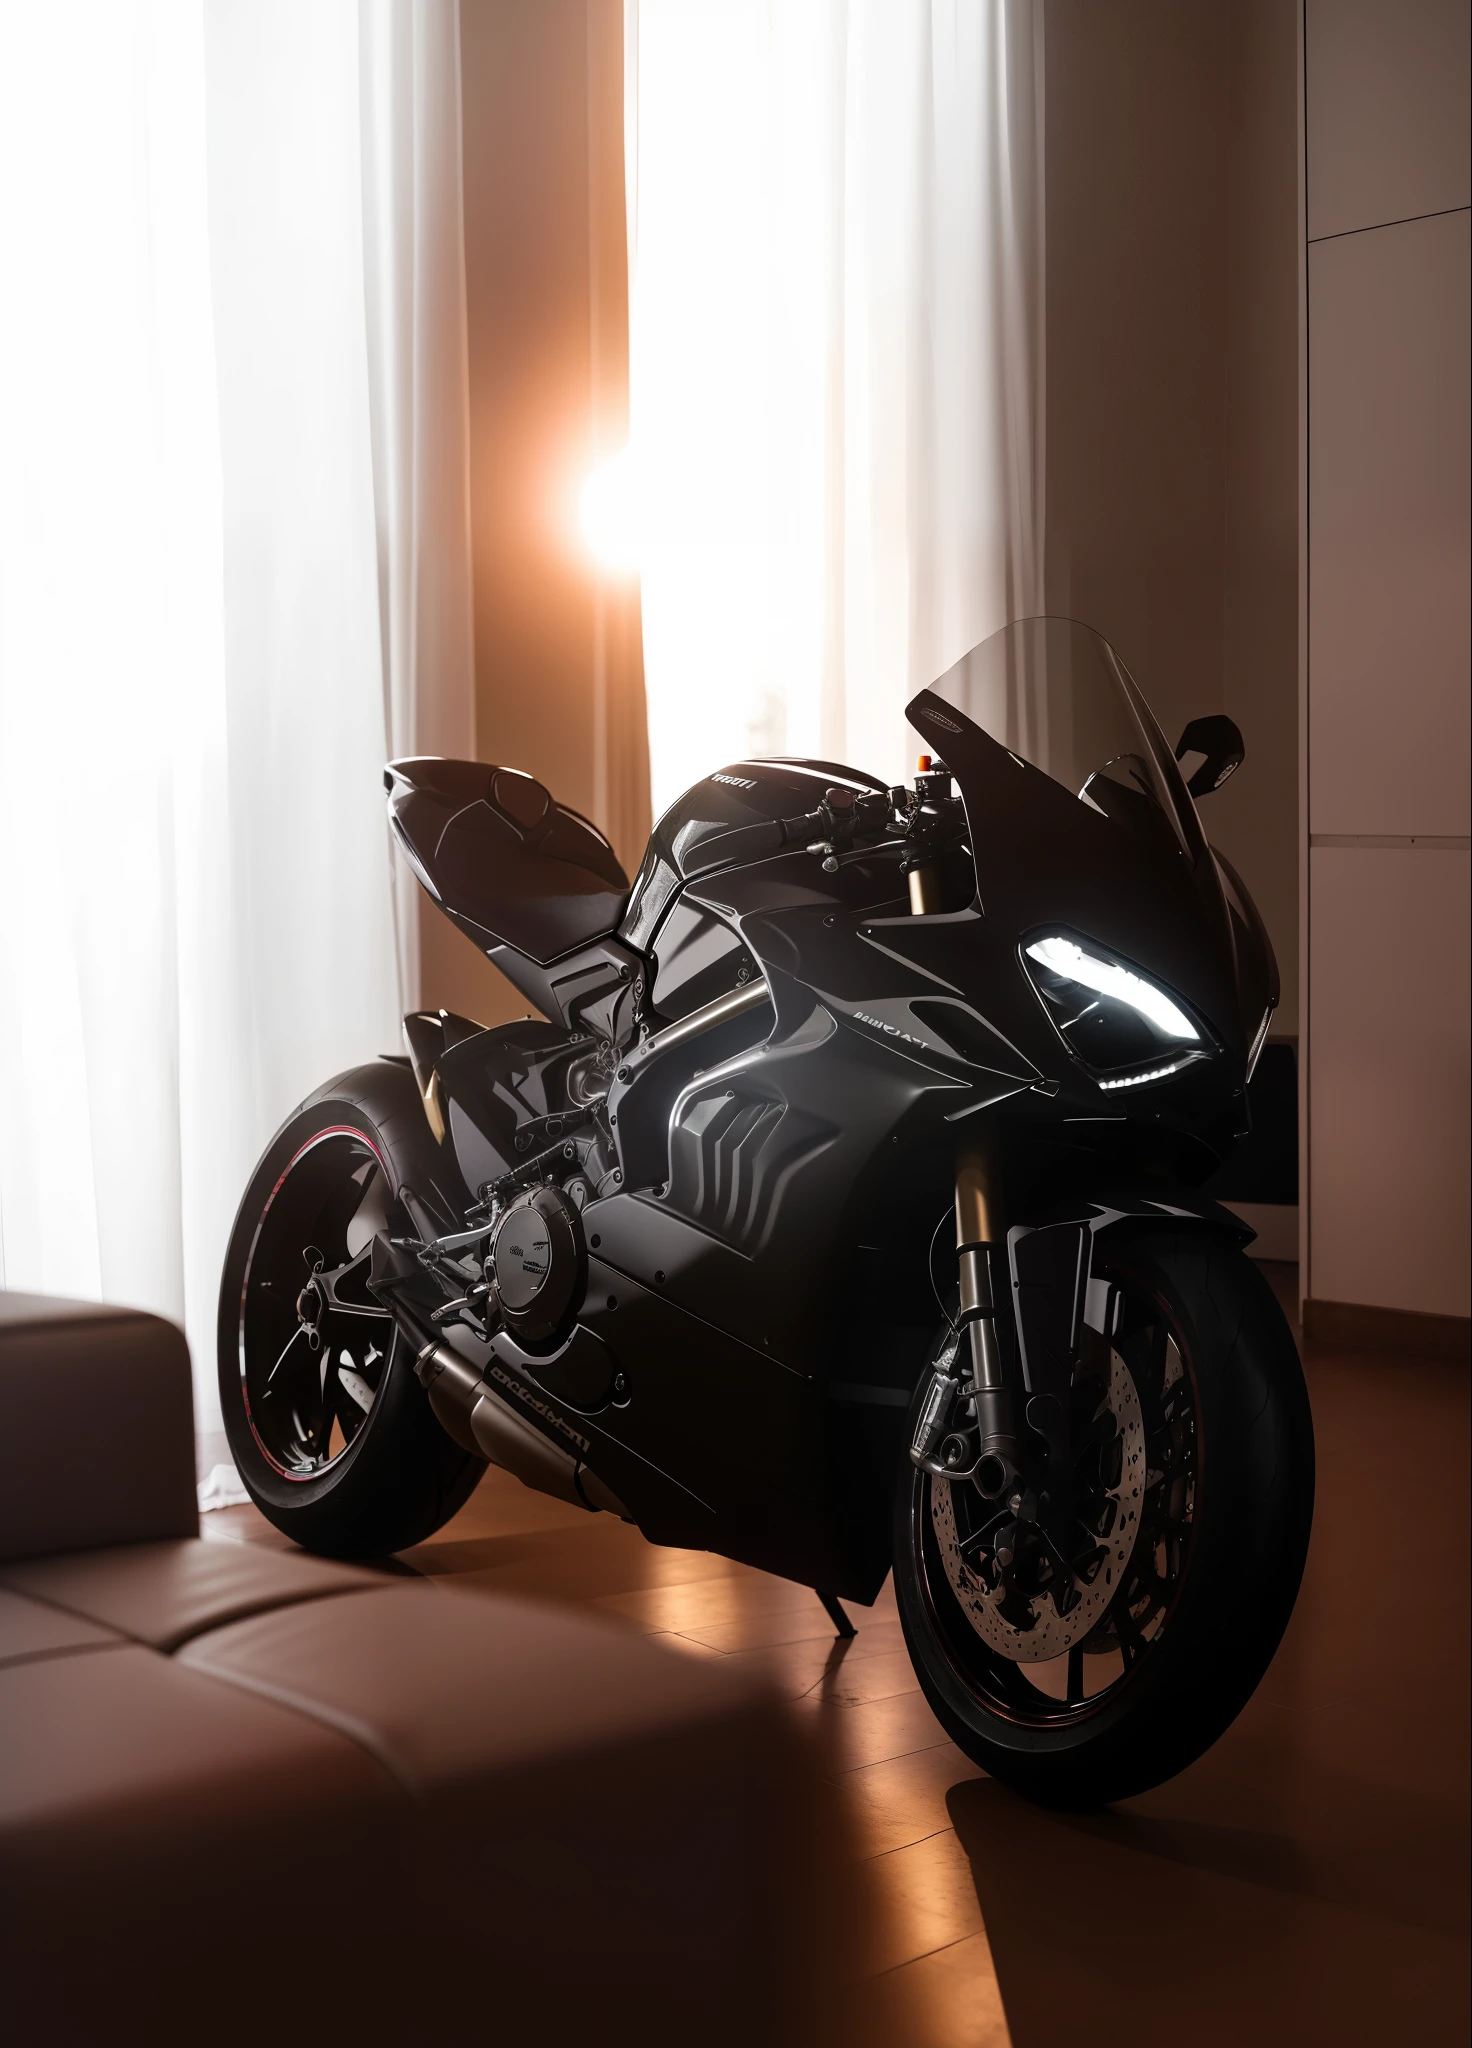 Ducati Panigale v4 🖤 motorcycle parked in front of a window in a living room, motorcycle, beautiful and cinematic lighting, motorcycles, with cinematic lighting, cinematic morning light, cinematic front shot, with photorealistic lighting, hyper realistic lighting, hyper - realistic lighting, with dramatic lighting, futuristic motorcycle, sports car in the room, very besautiful ambient light, motorbike